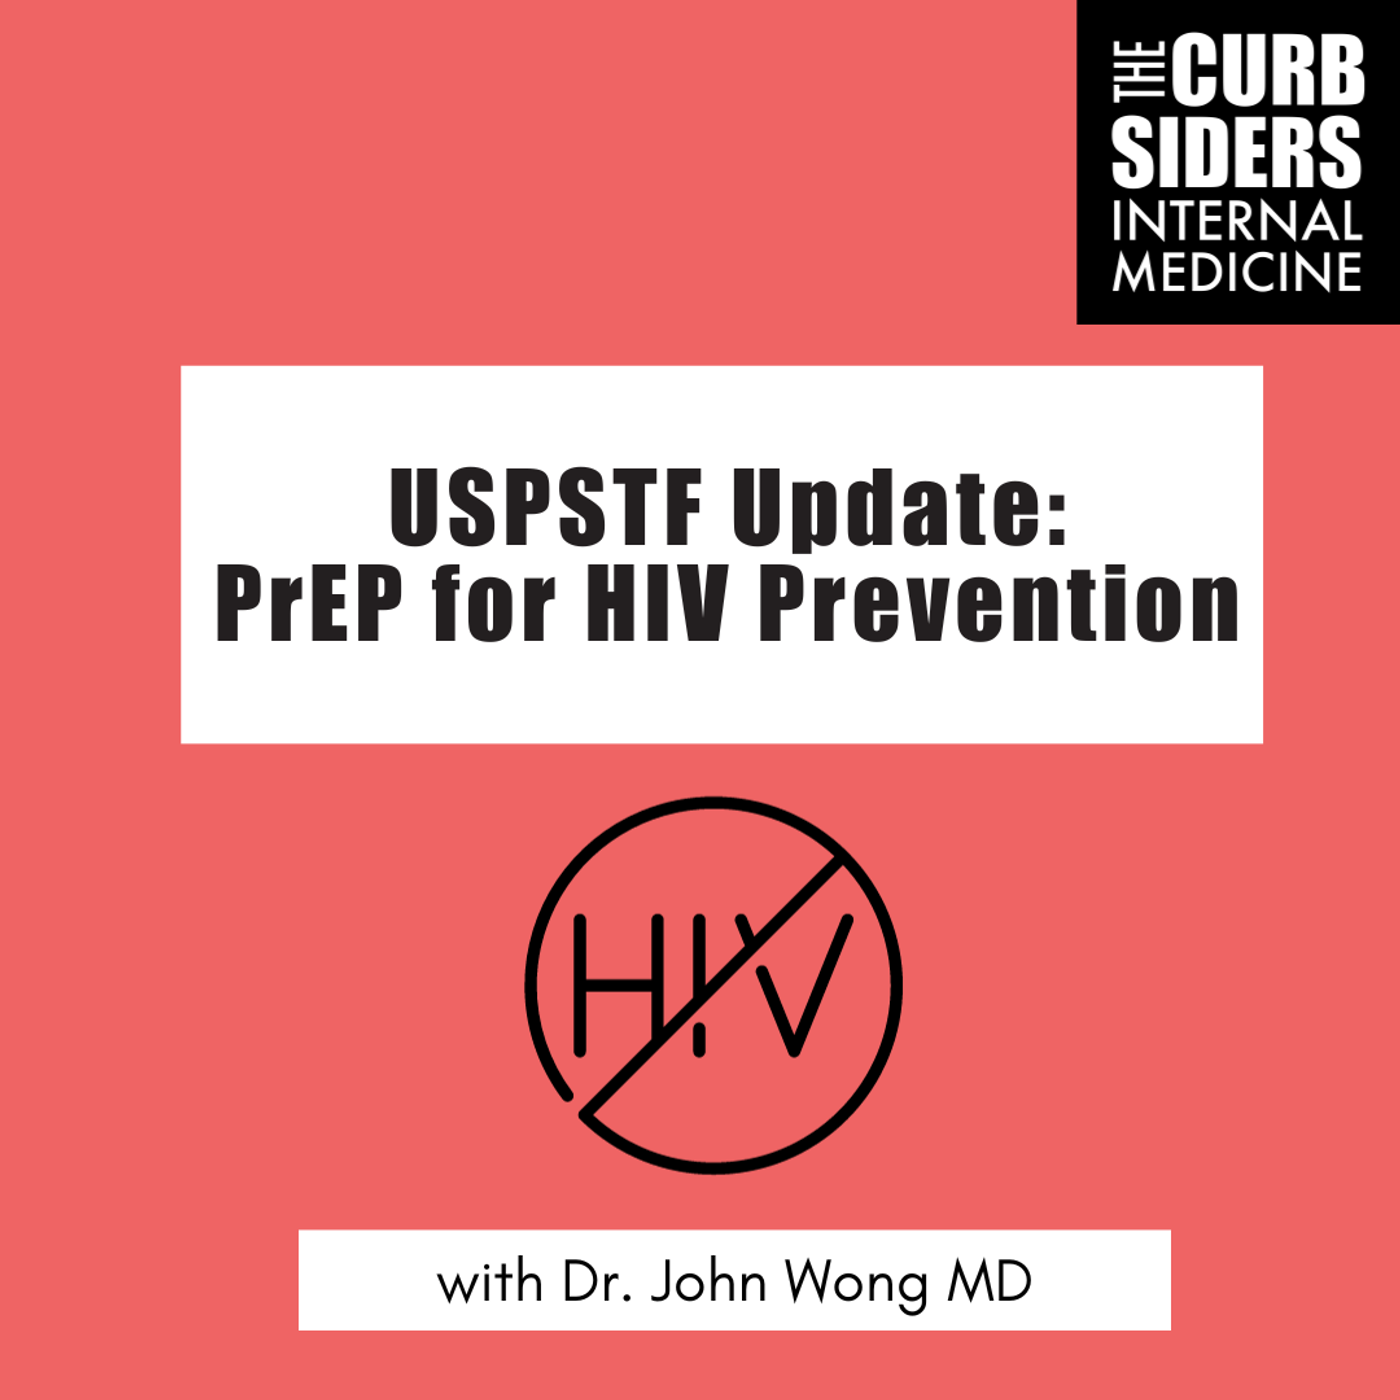 #417 USPSTF Update: PrEP for HIV Prevention with Dr. John Wong MD